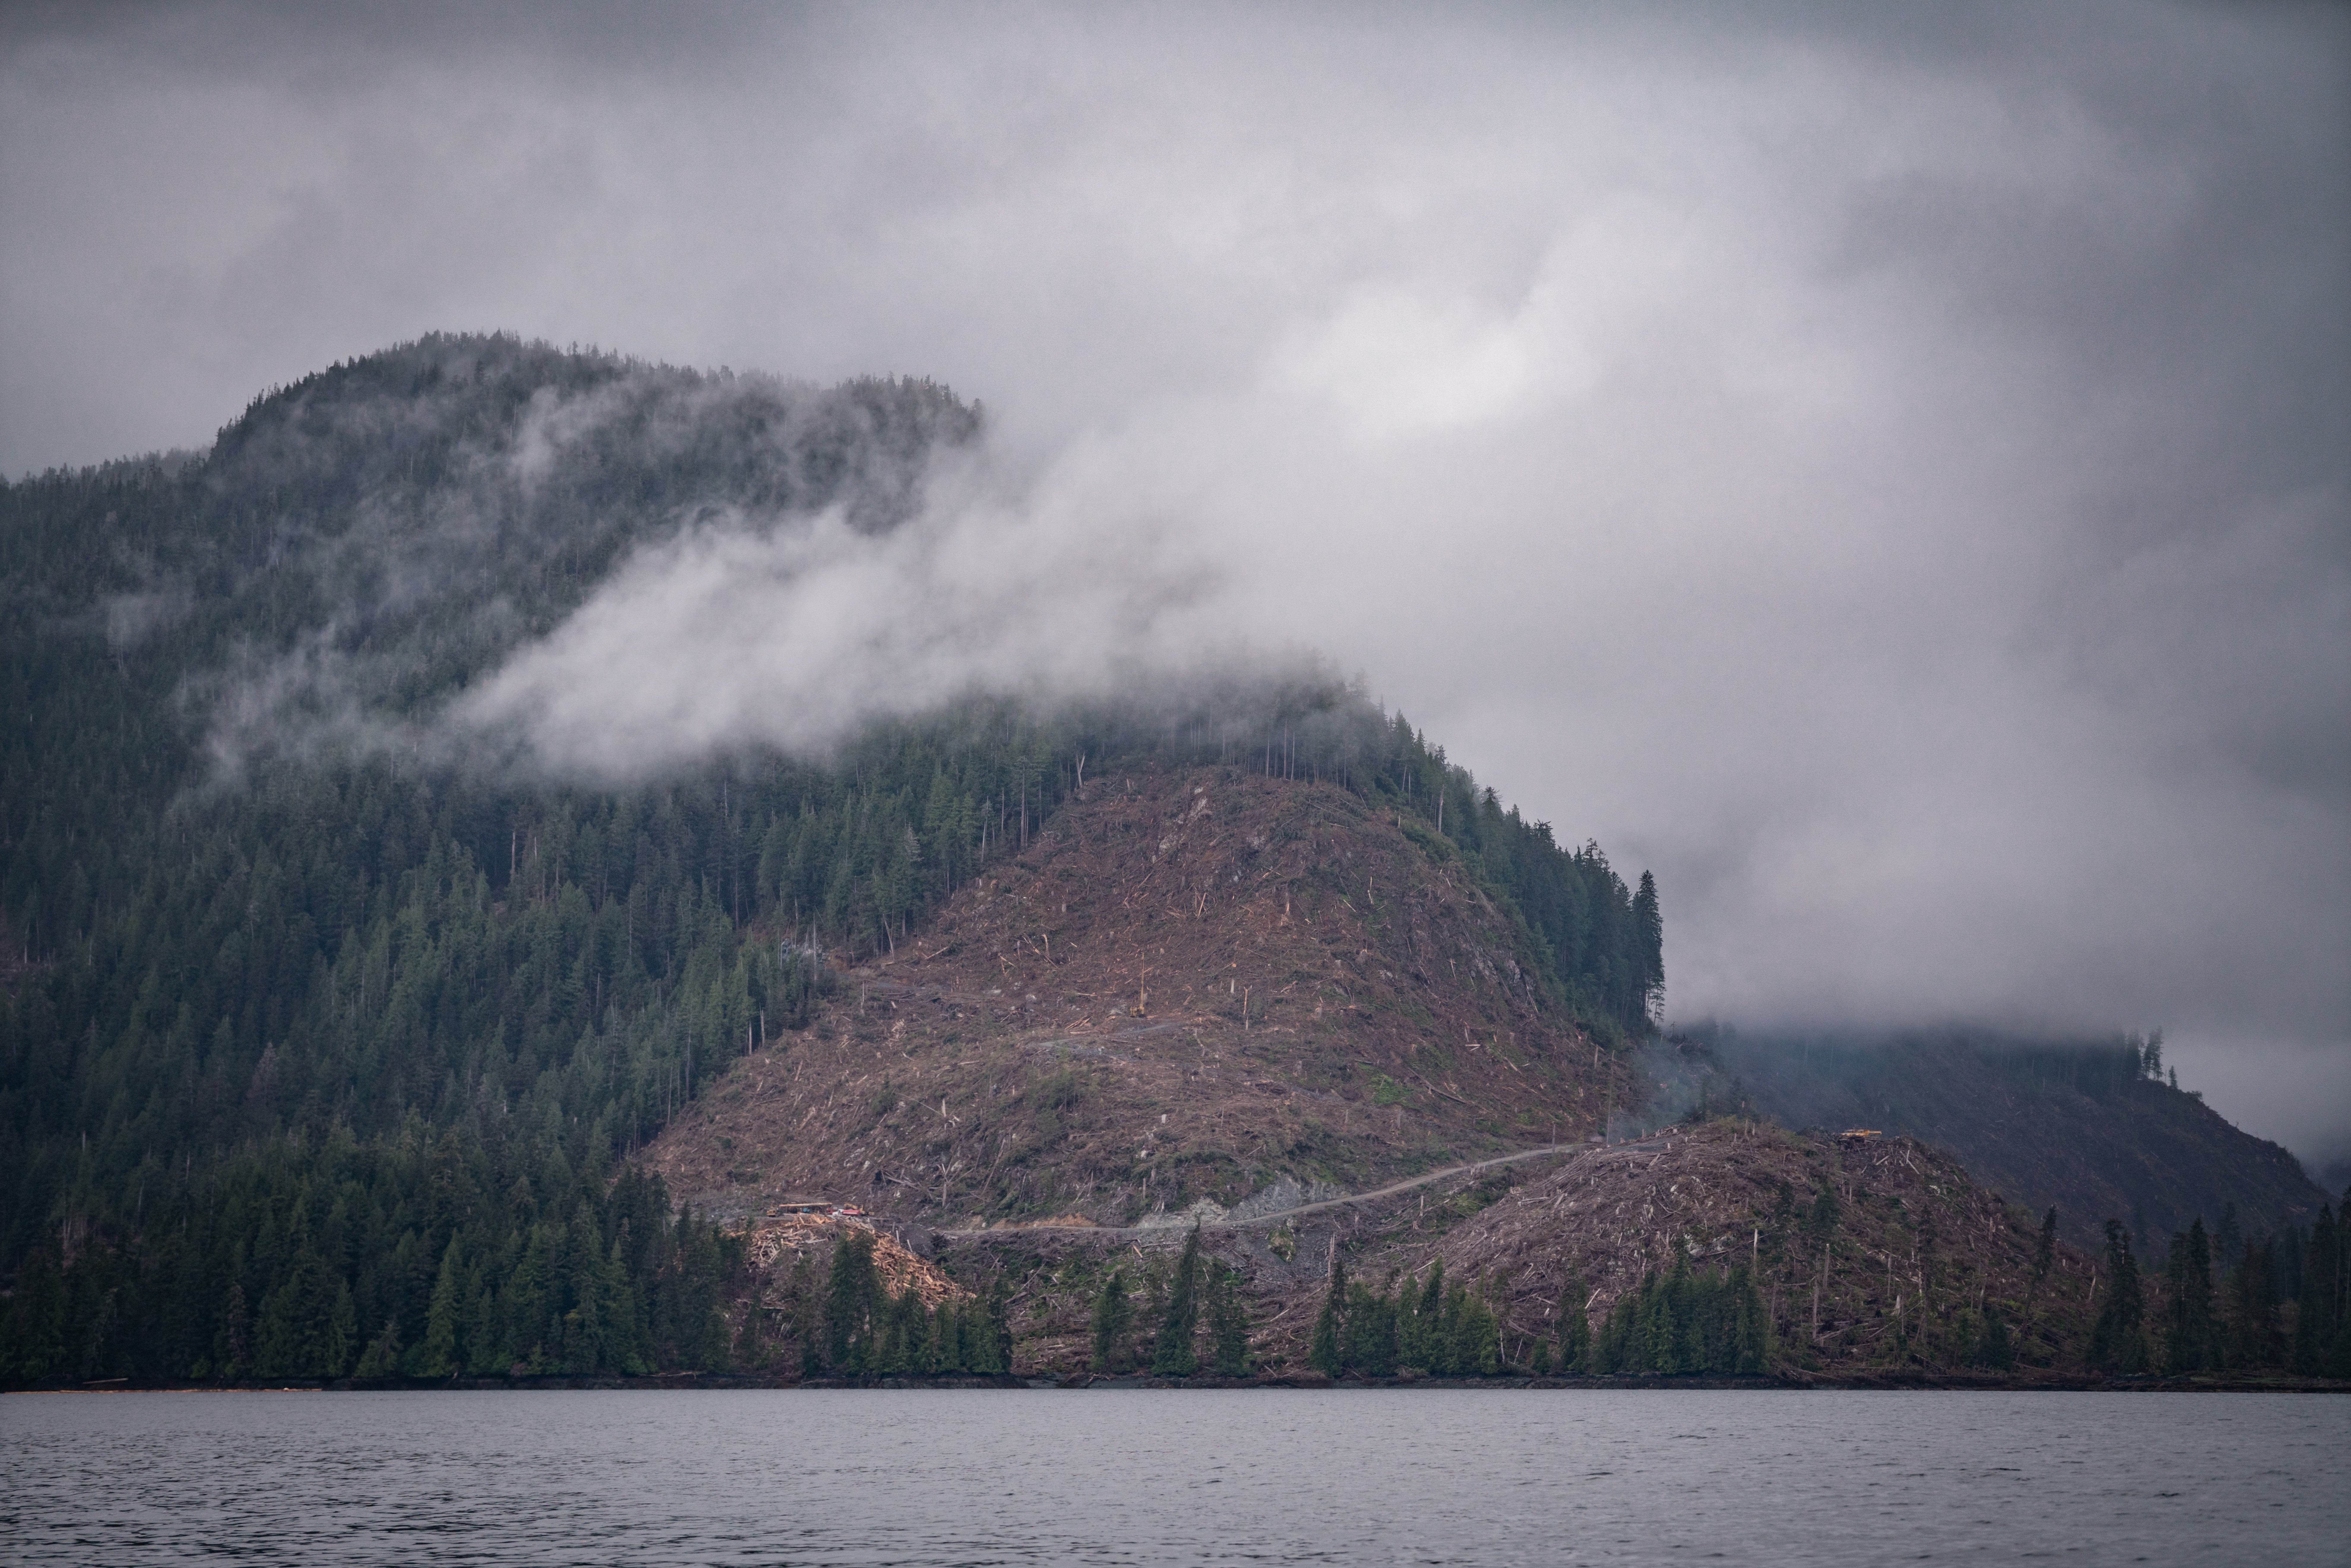 Logging has altered the landscape on Prince of Wales Island in Southeast Alaska.
(Colin Arisman)